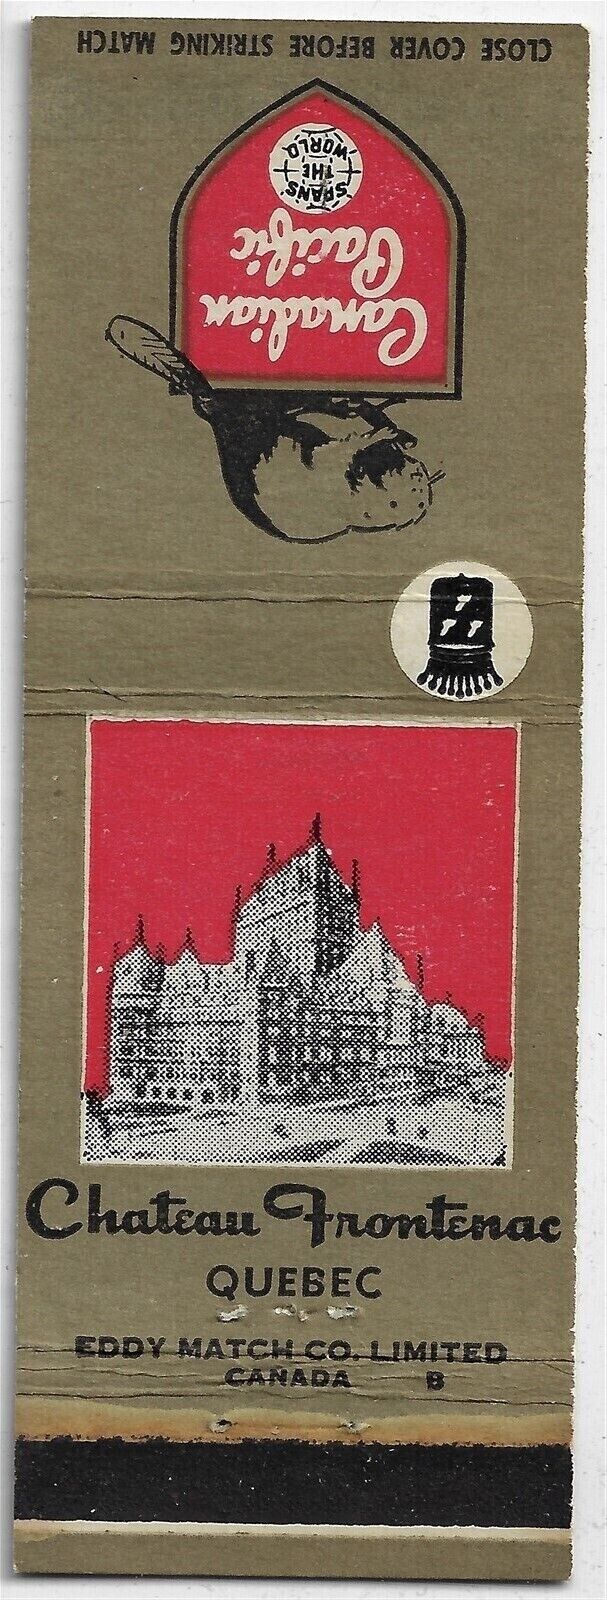 Chateass Frontenae Hotel Quebec Canadian Pacific RREmpty Matchcover